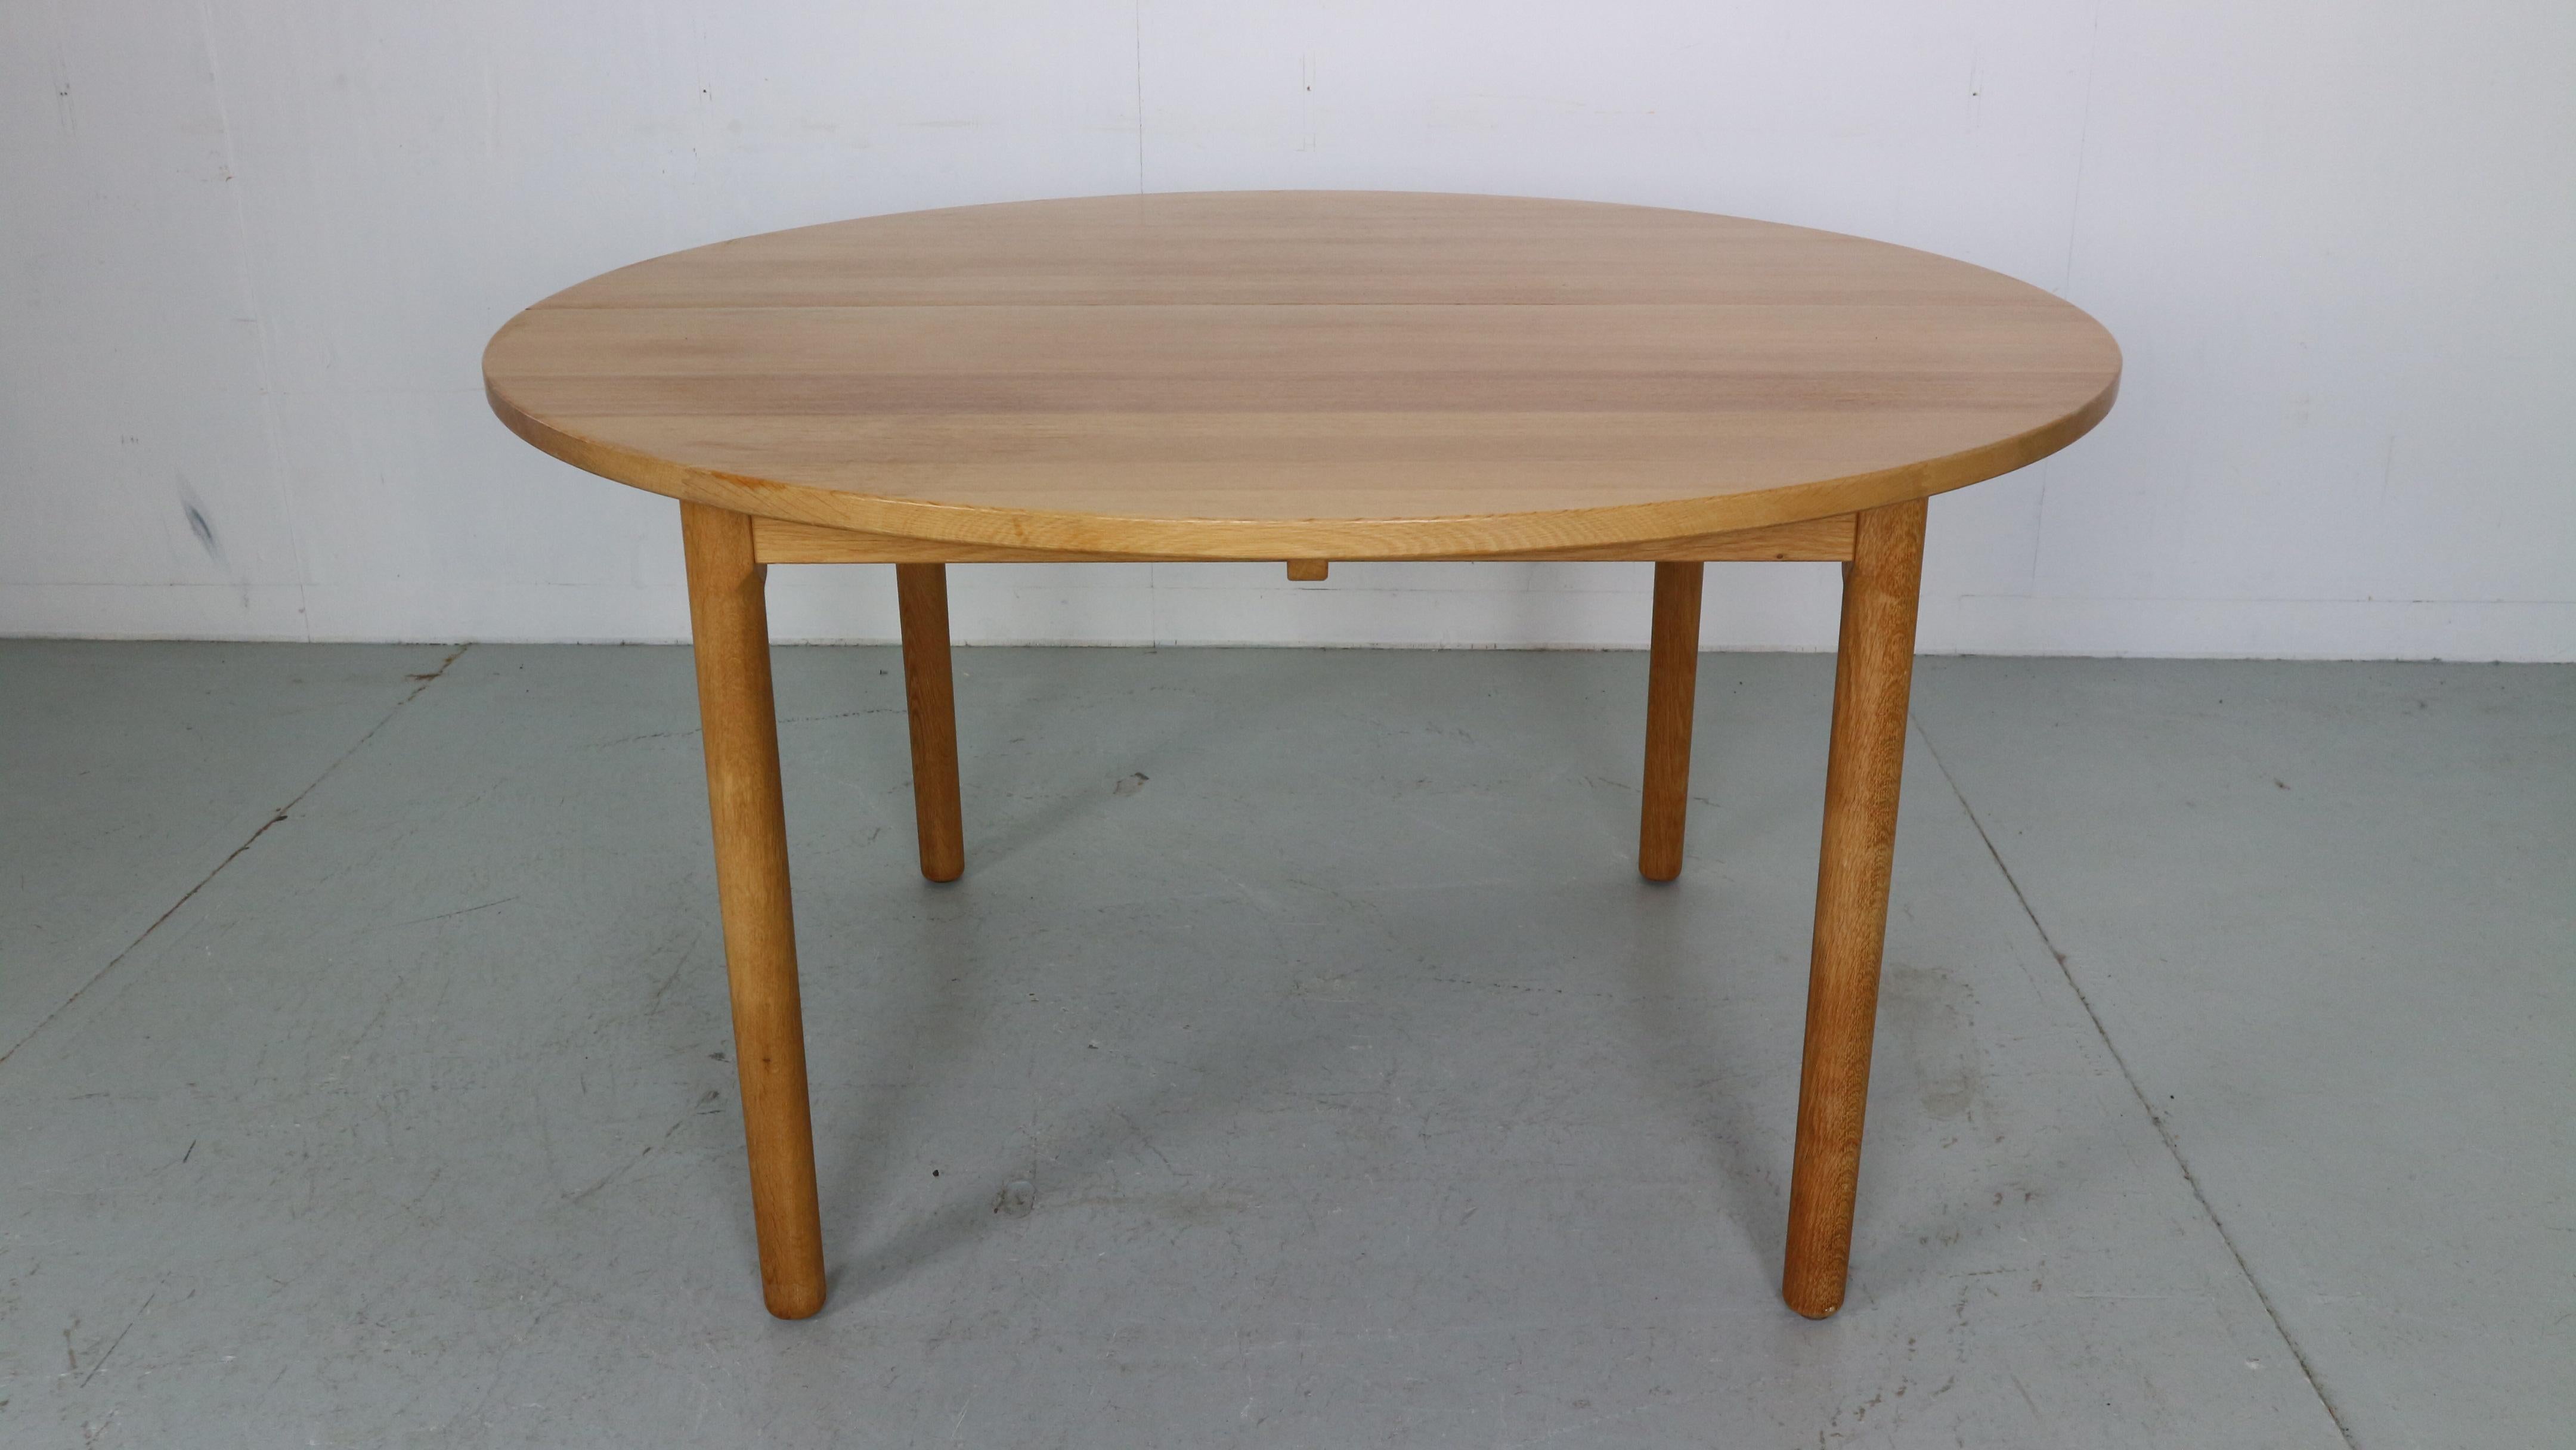 Scandinavian modern period dining table designed by hans J. Wegner and manufactured for CM-HAARBY in 1970s period, Denmark. 
Made of oak wood. 
Round dinning table has an extension leave. Extended from 129cm to 179cm wide. 
The table is in a great